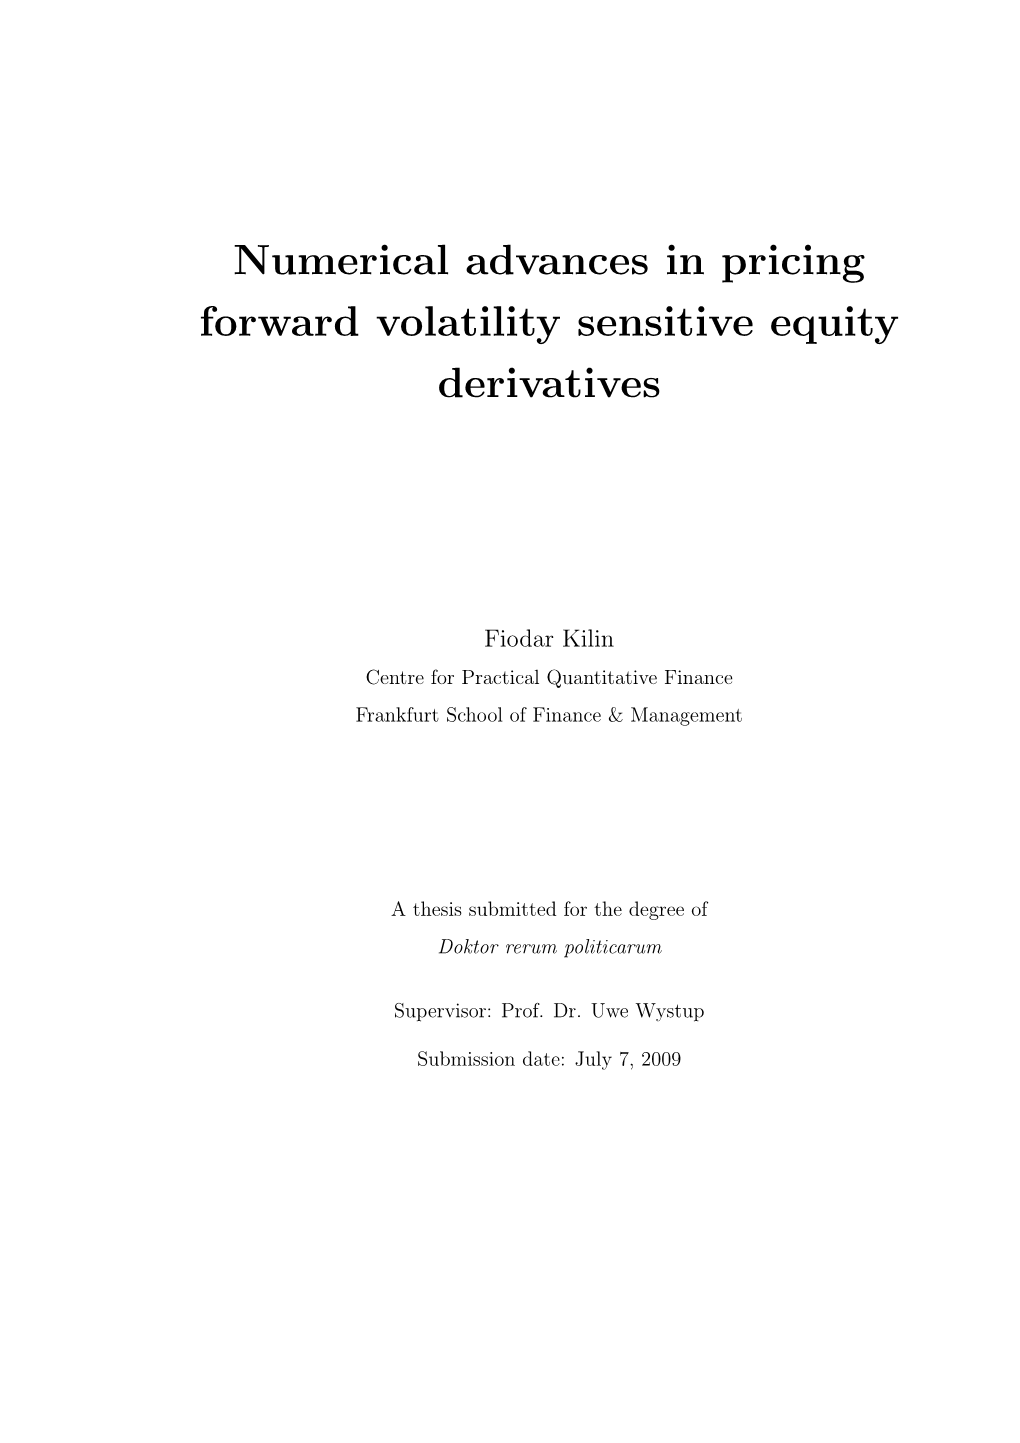 Numerical Advances in Pricing Forward Volatility Sensitive Equity Derivatives